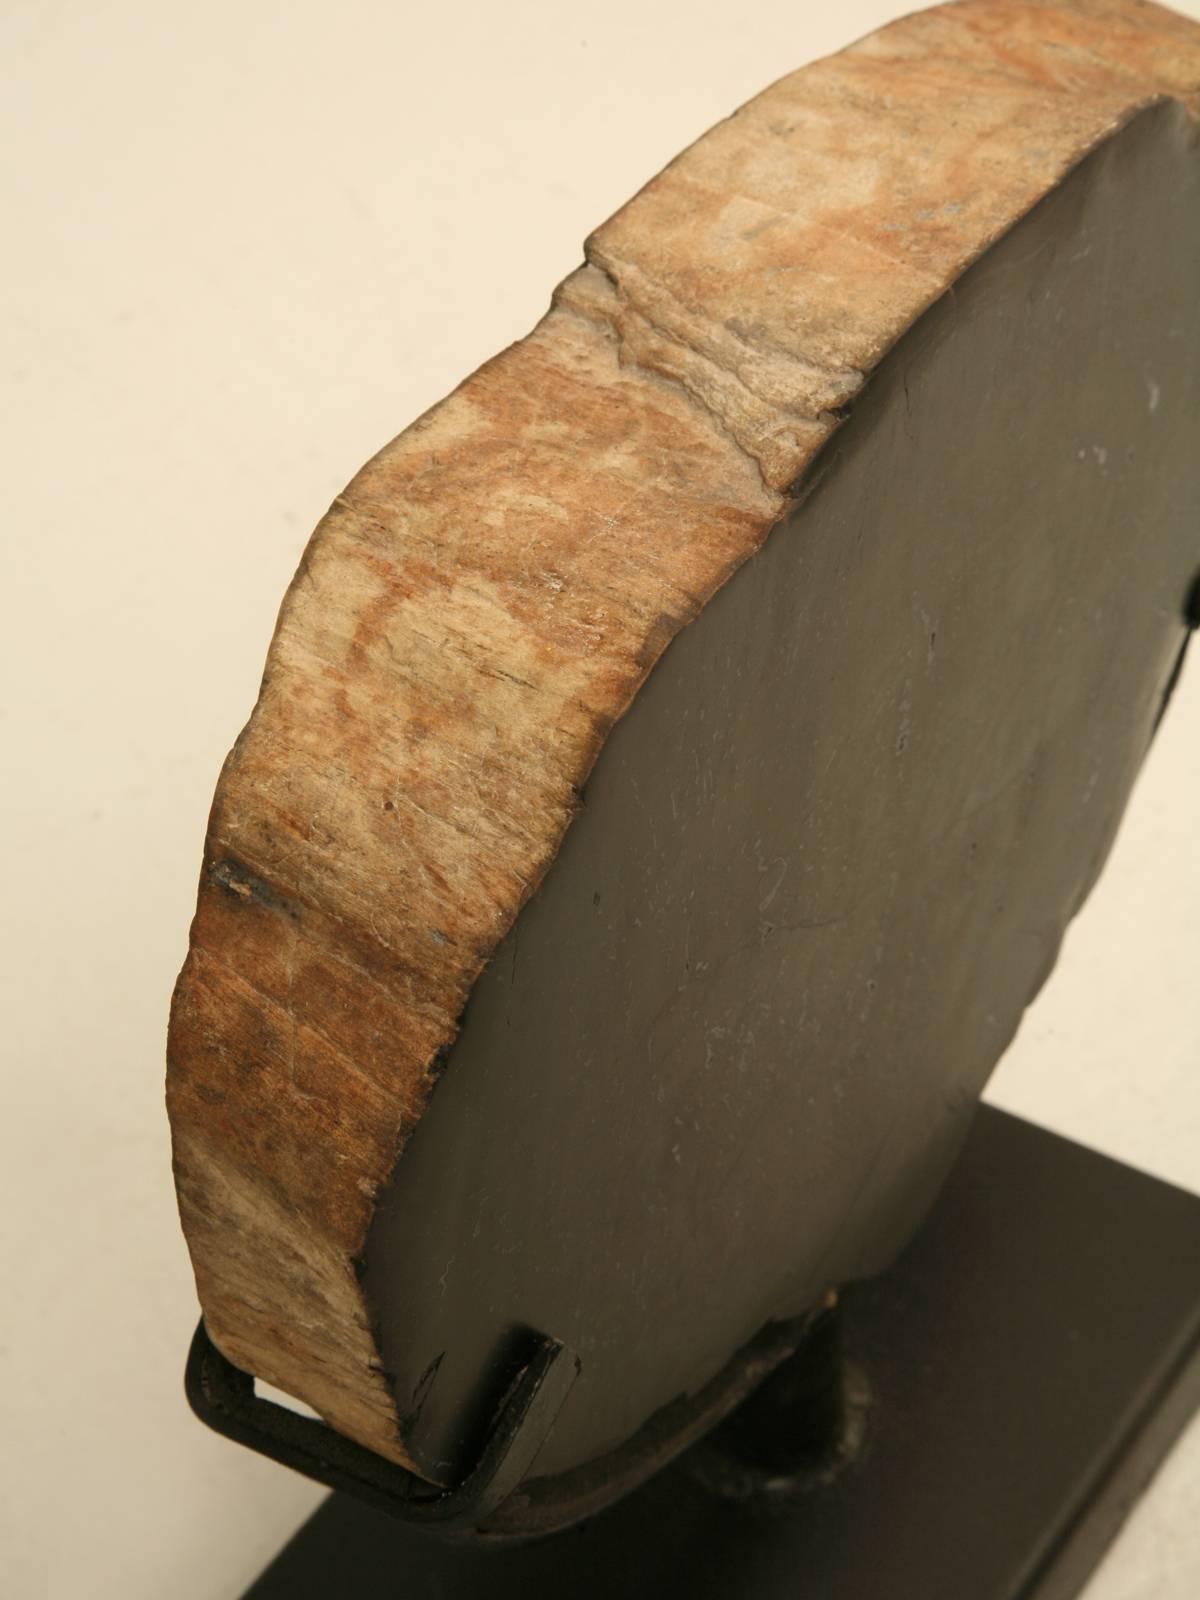 Petrified wood, (from the Greek root petro meaning 